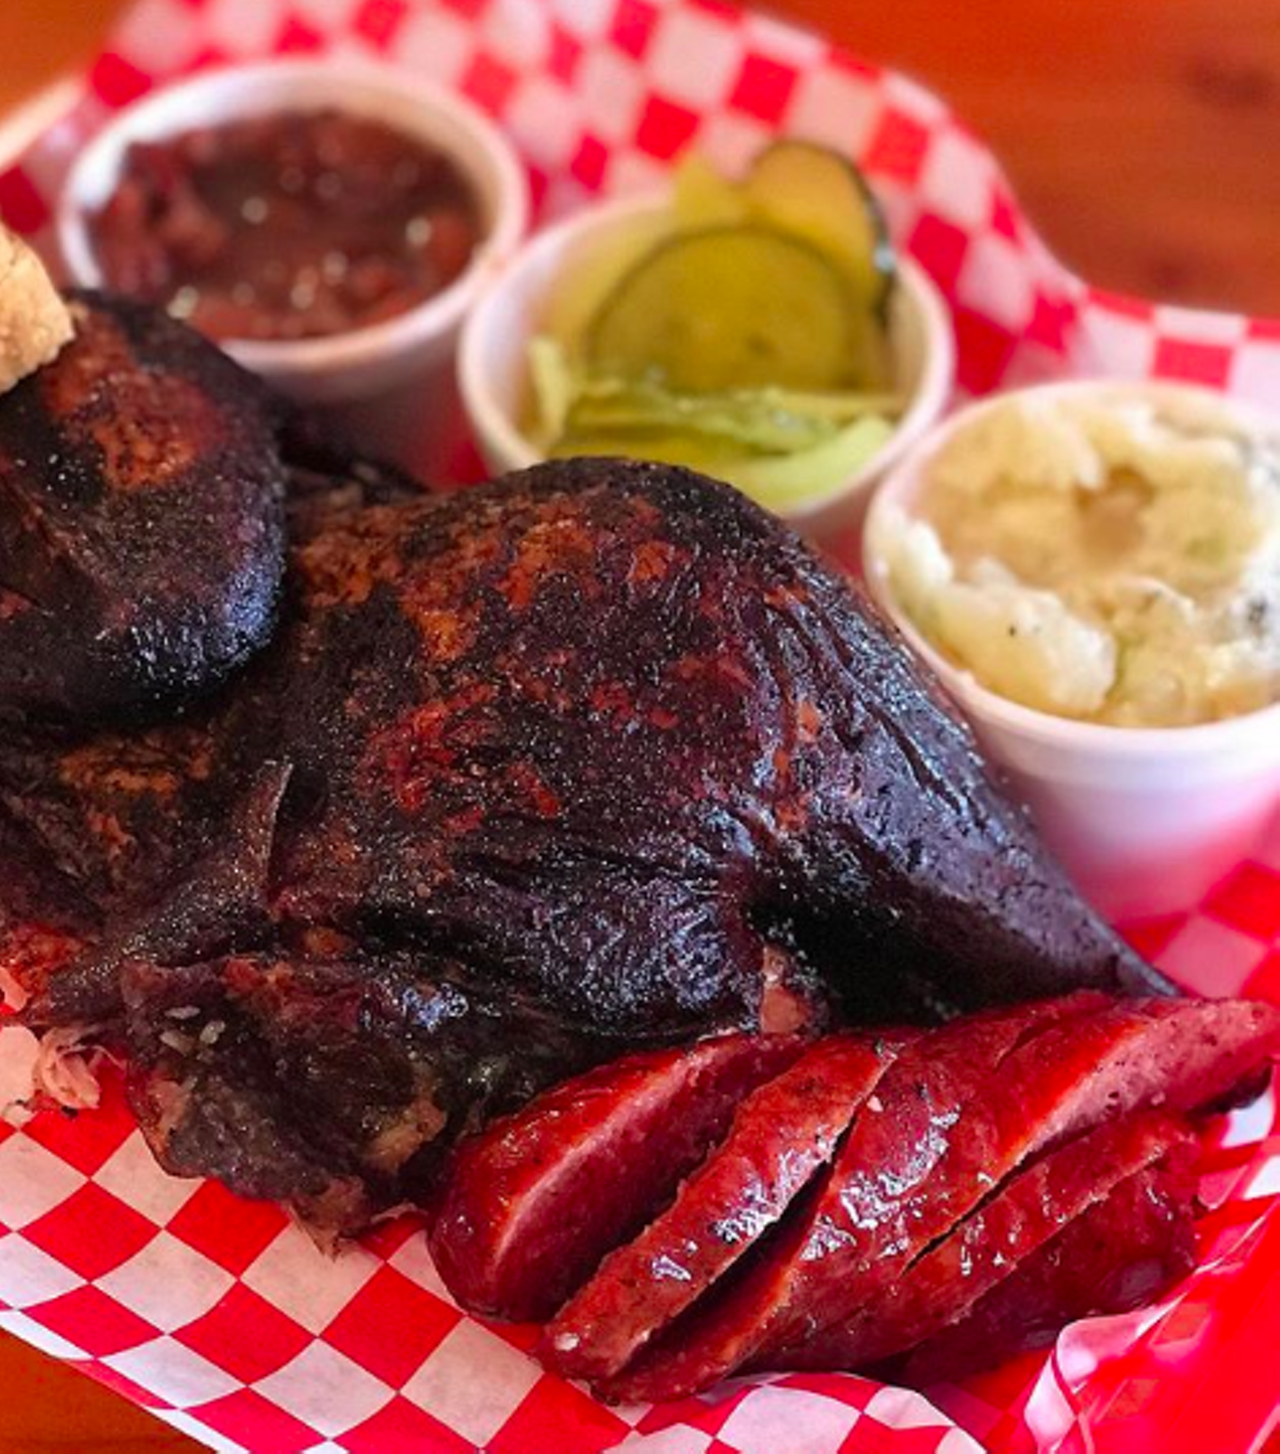 Orly's BBQ
3827 SW Military Dr, (210) 334-0300, 
Found not too far from the edge of Lackland AFB, Orly’s BBQ makes for a great barbecue spot in the area. Though the hours are funky, you can stop in to take advantage of the daily lunch specials. There’s also “feast” options and family packs if you come in during the weekend. Either way, you’re doing yourself a favor if you order up the brisket and your favorite sides.
Photo via Instagram / lonestarloner